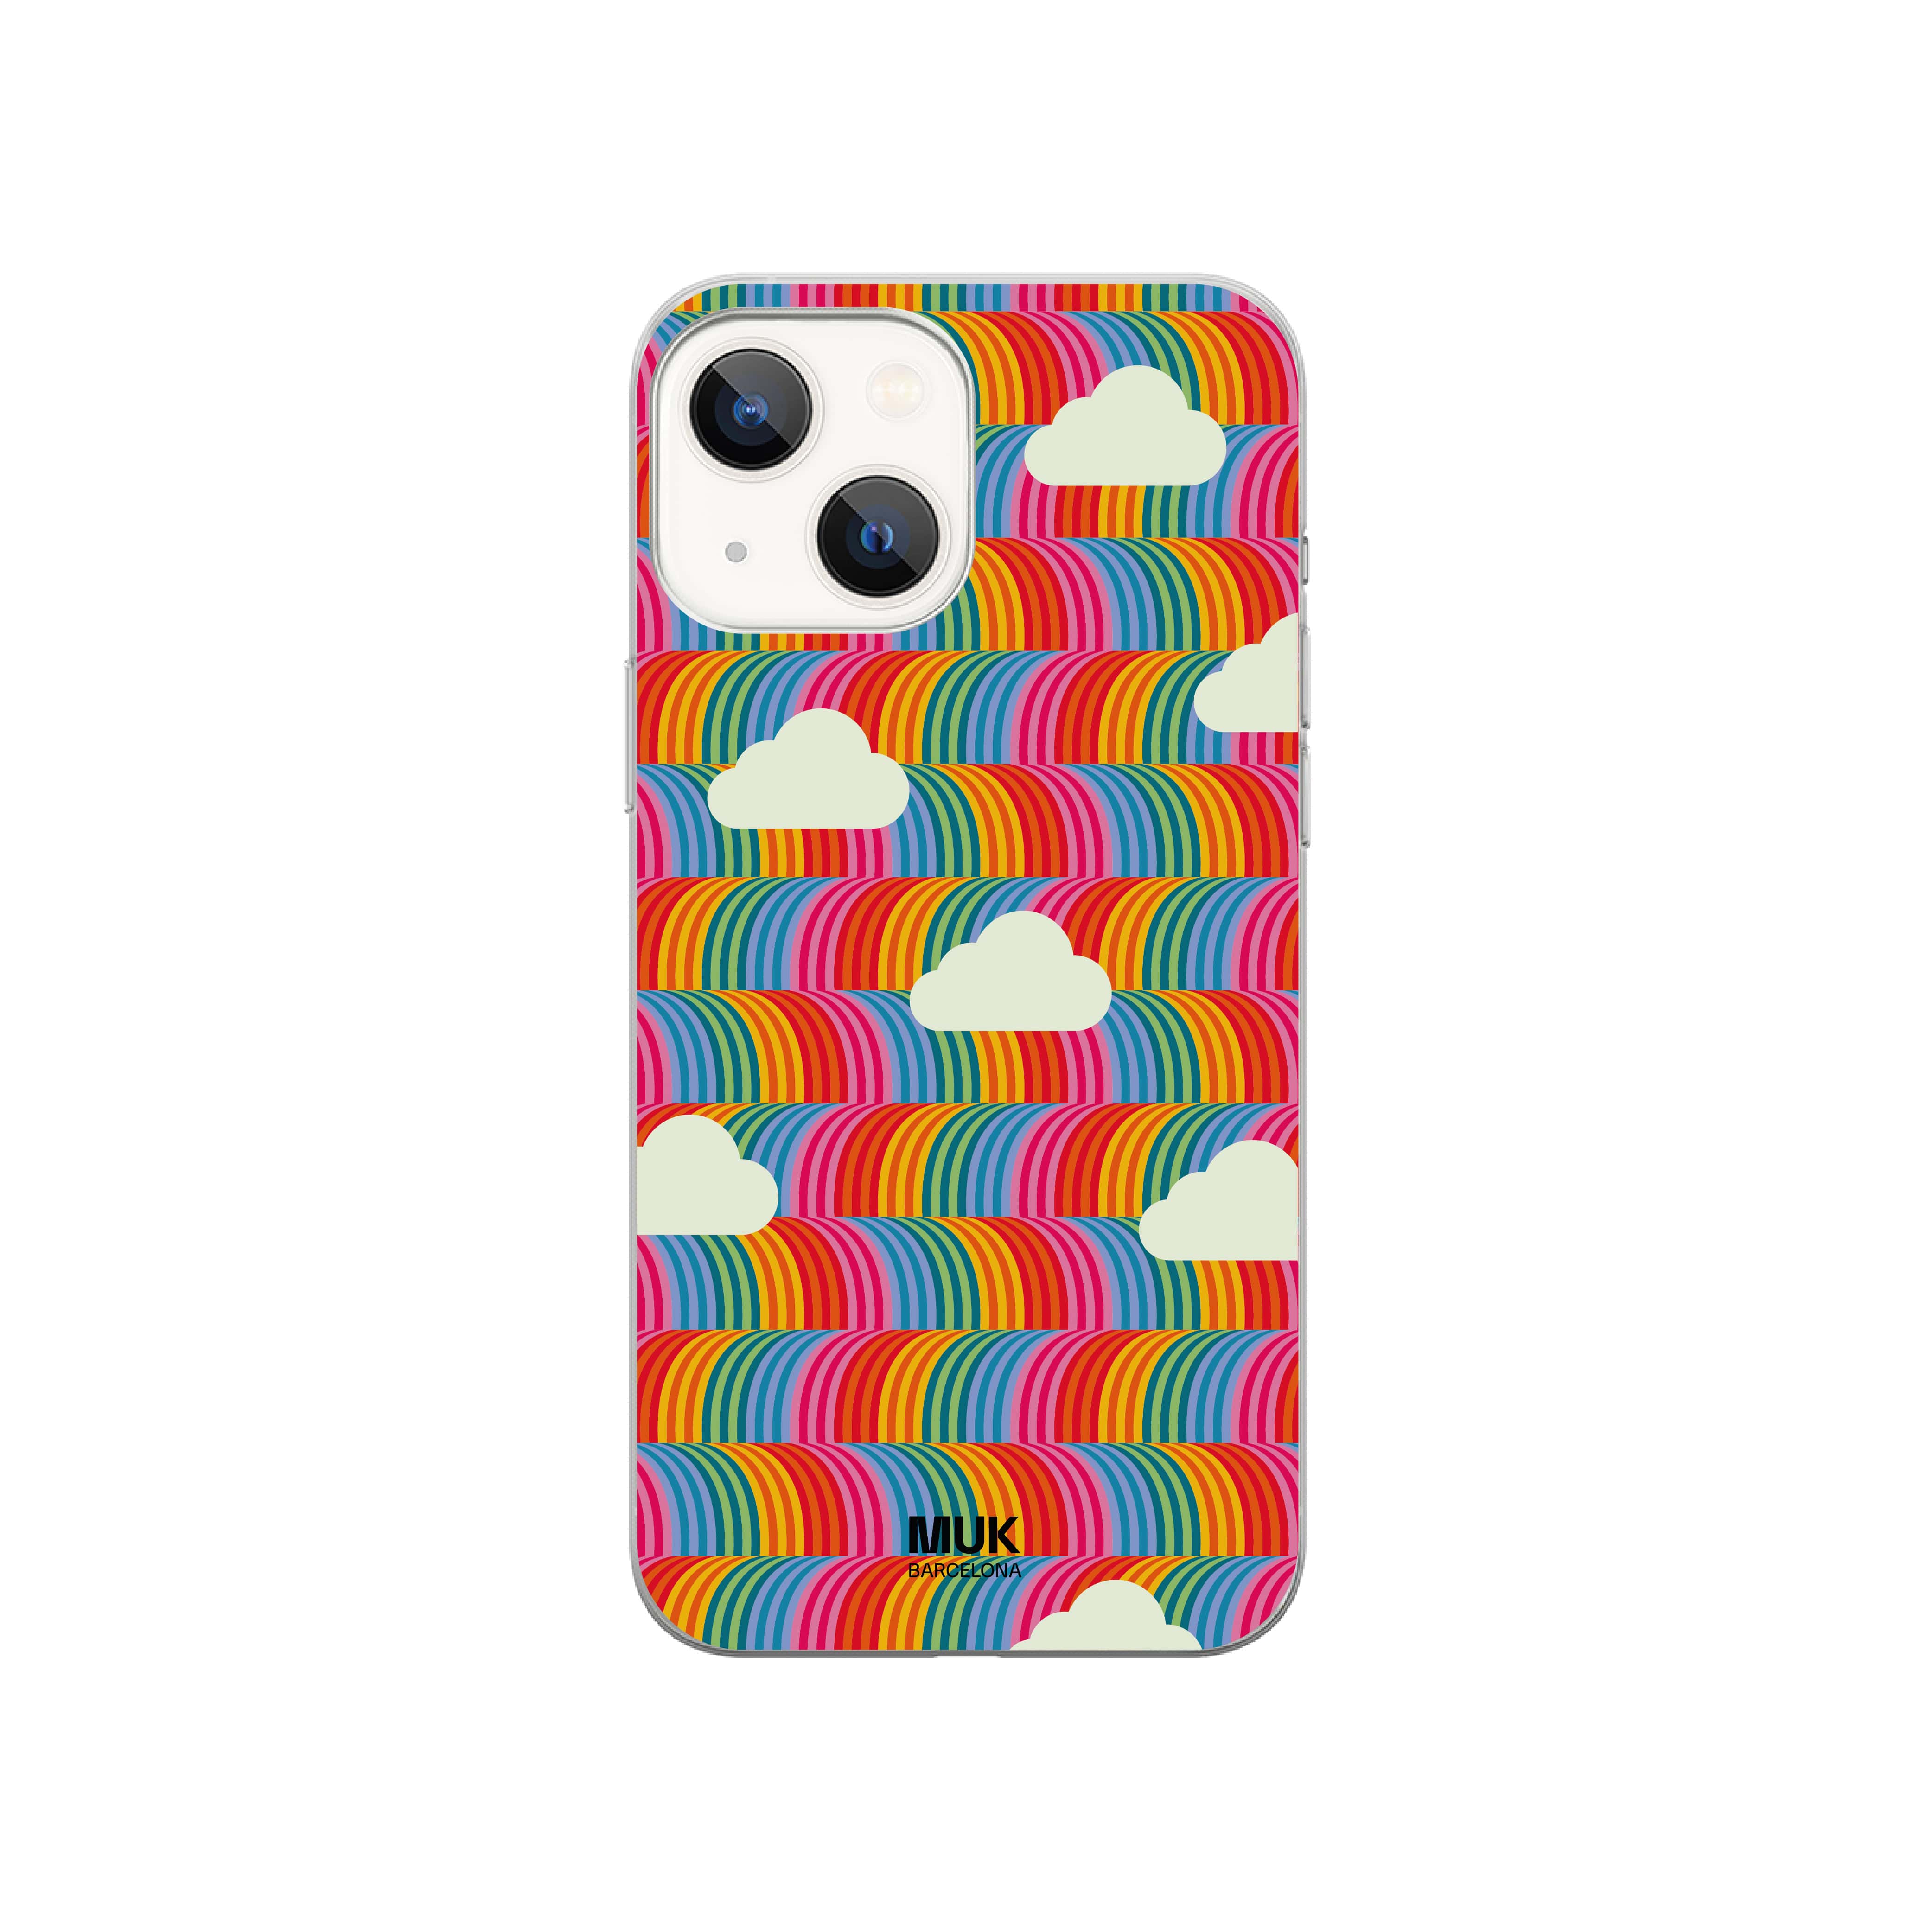 Clear Phone Case in rainbow colors with clouds.
